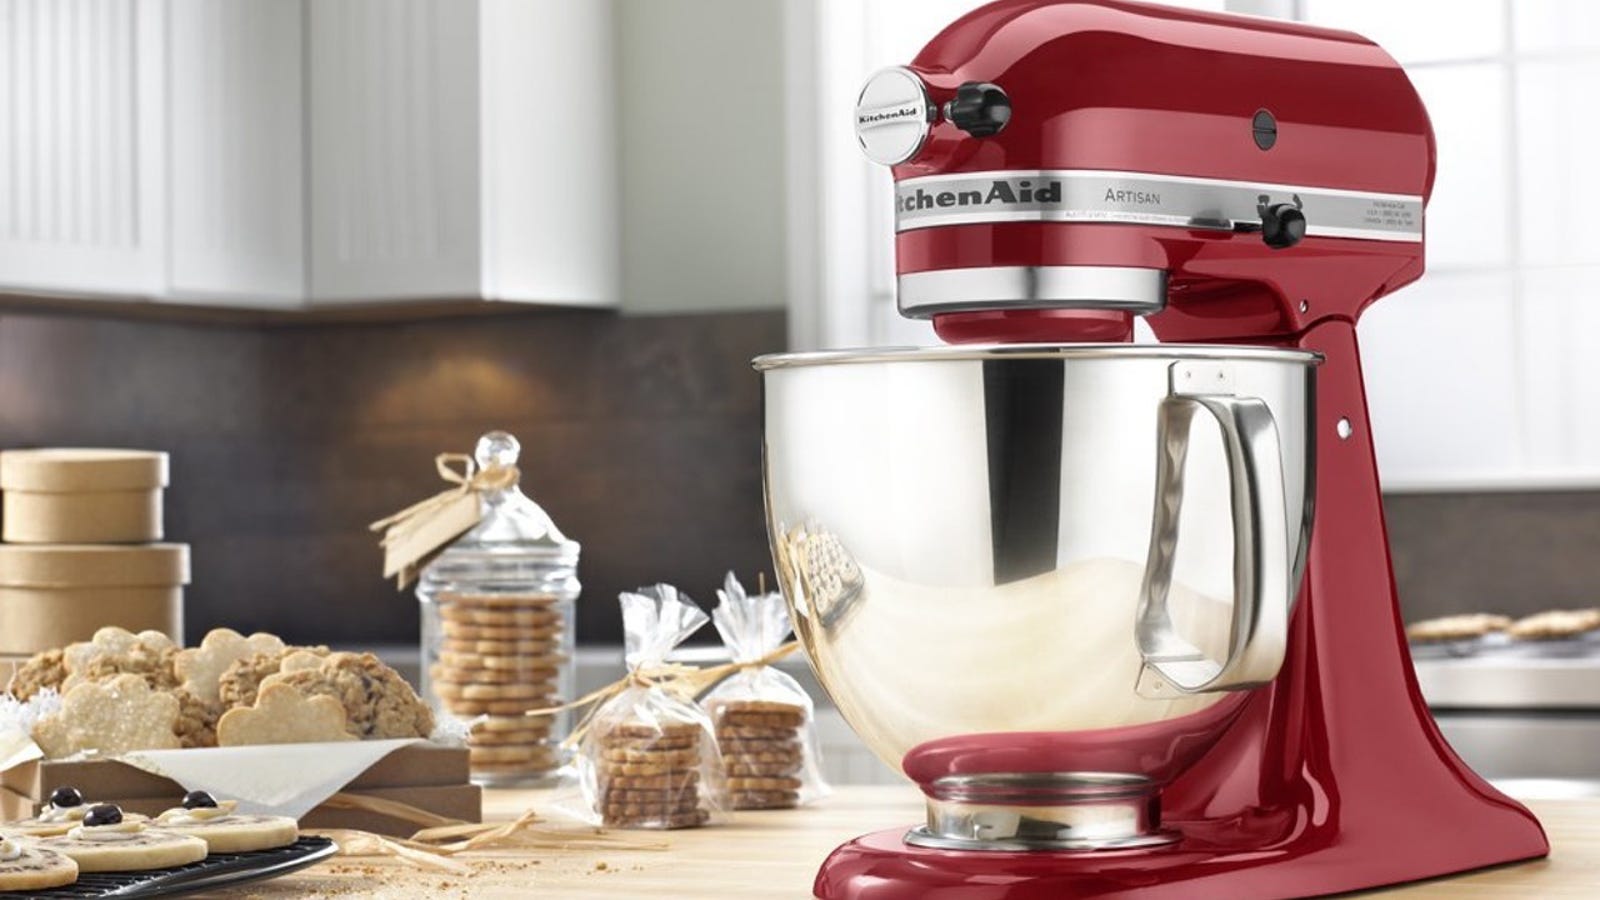 Save Nearly $100 On the Essential KitchenAid Artisan Stand Mixer